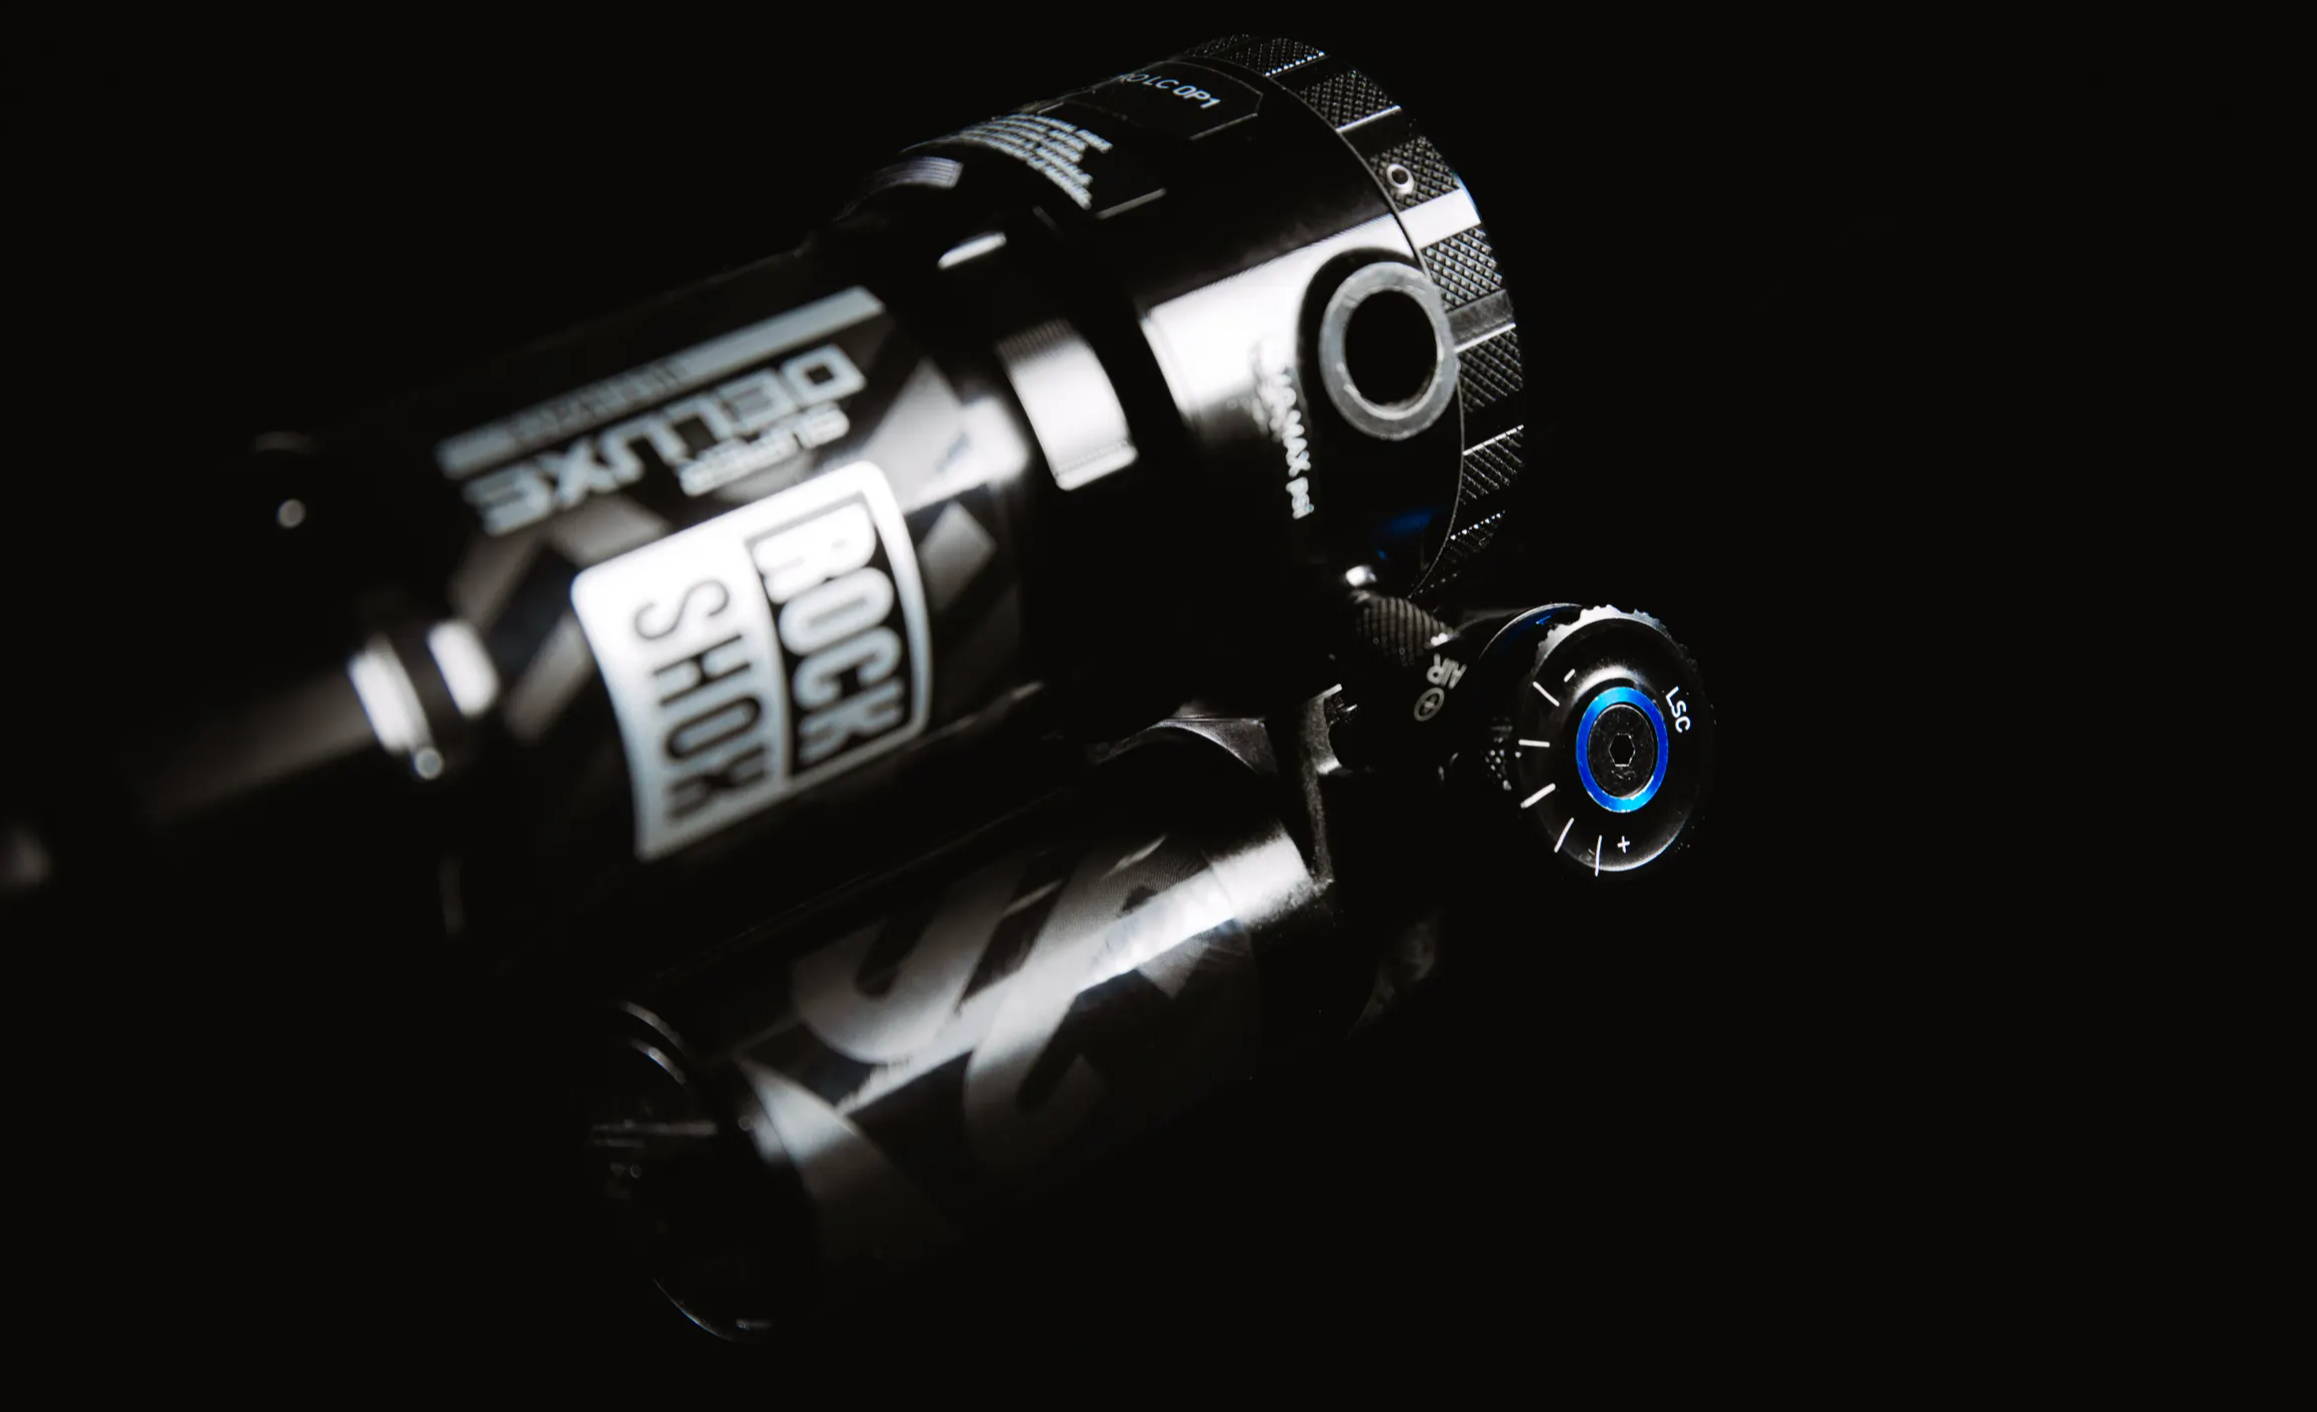 detail of the low speed compression knob on the rockshox super deluxe ultimate mountain bike rear shock on a black background